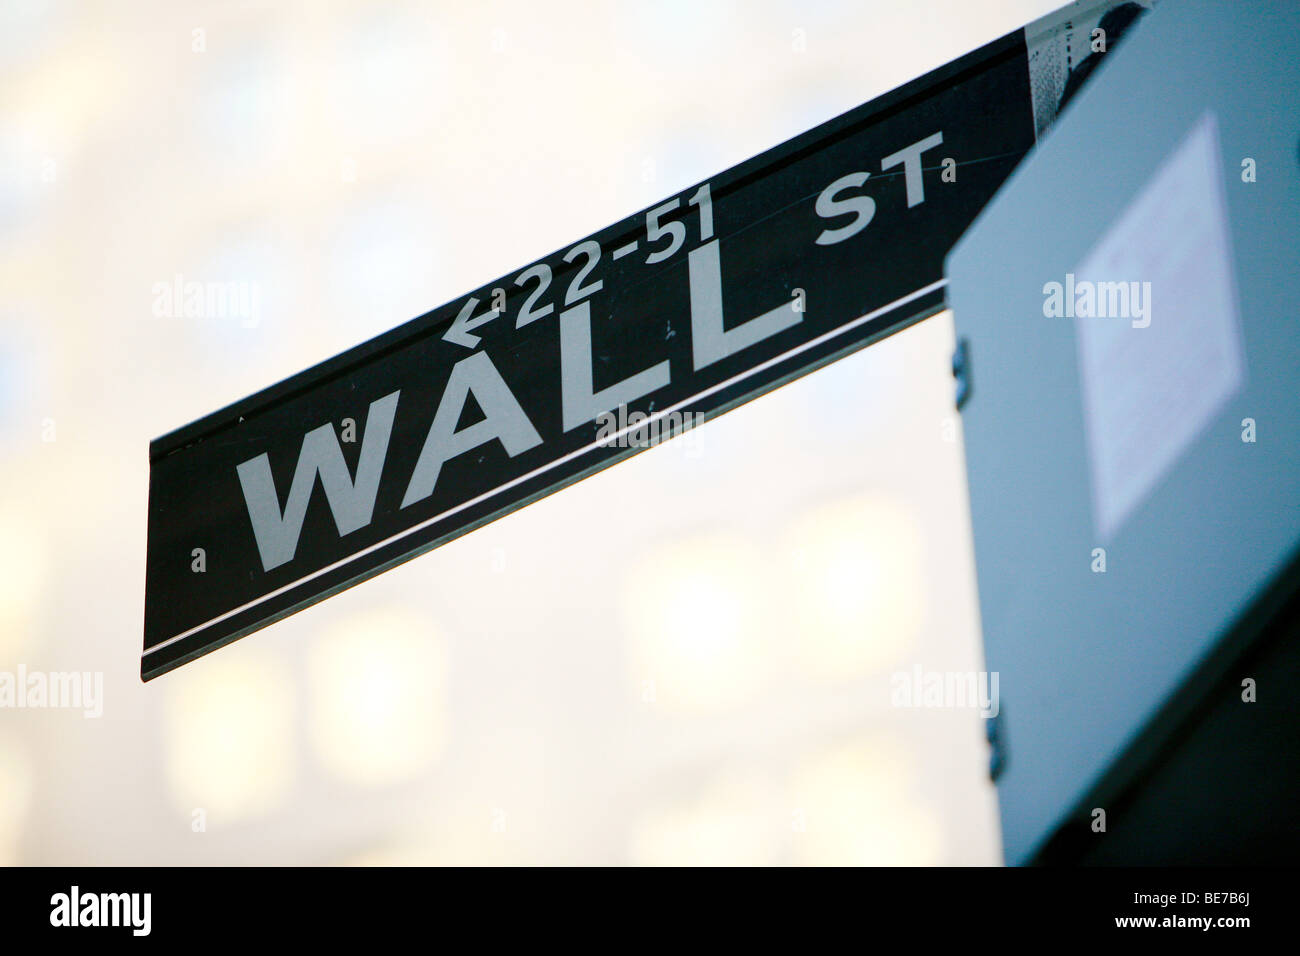 Wall street sign in the financial district area of downtown Manhattan in New York city, united states. Stock Photo